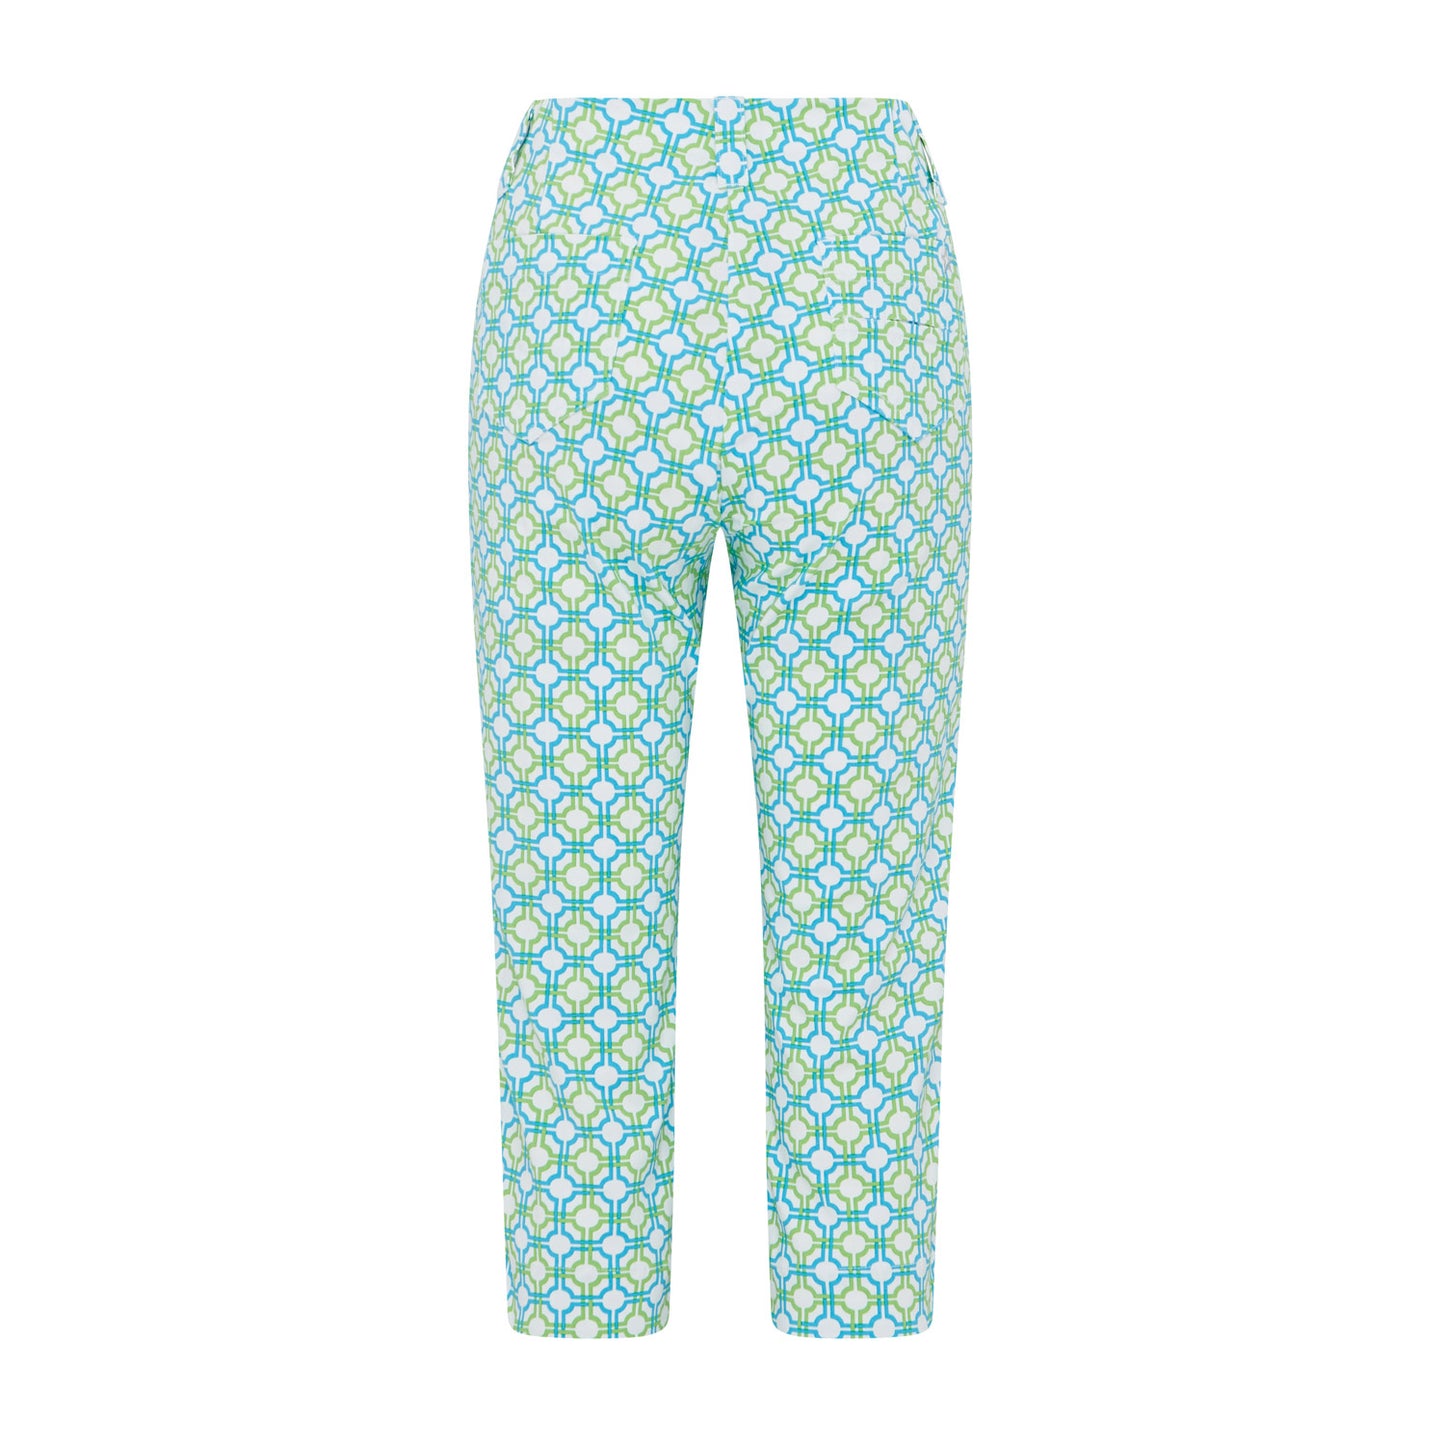 Swing Out Sister Women's Pull-On Capris in Dazzling Blue and Emerald with Mosaic Pattern